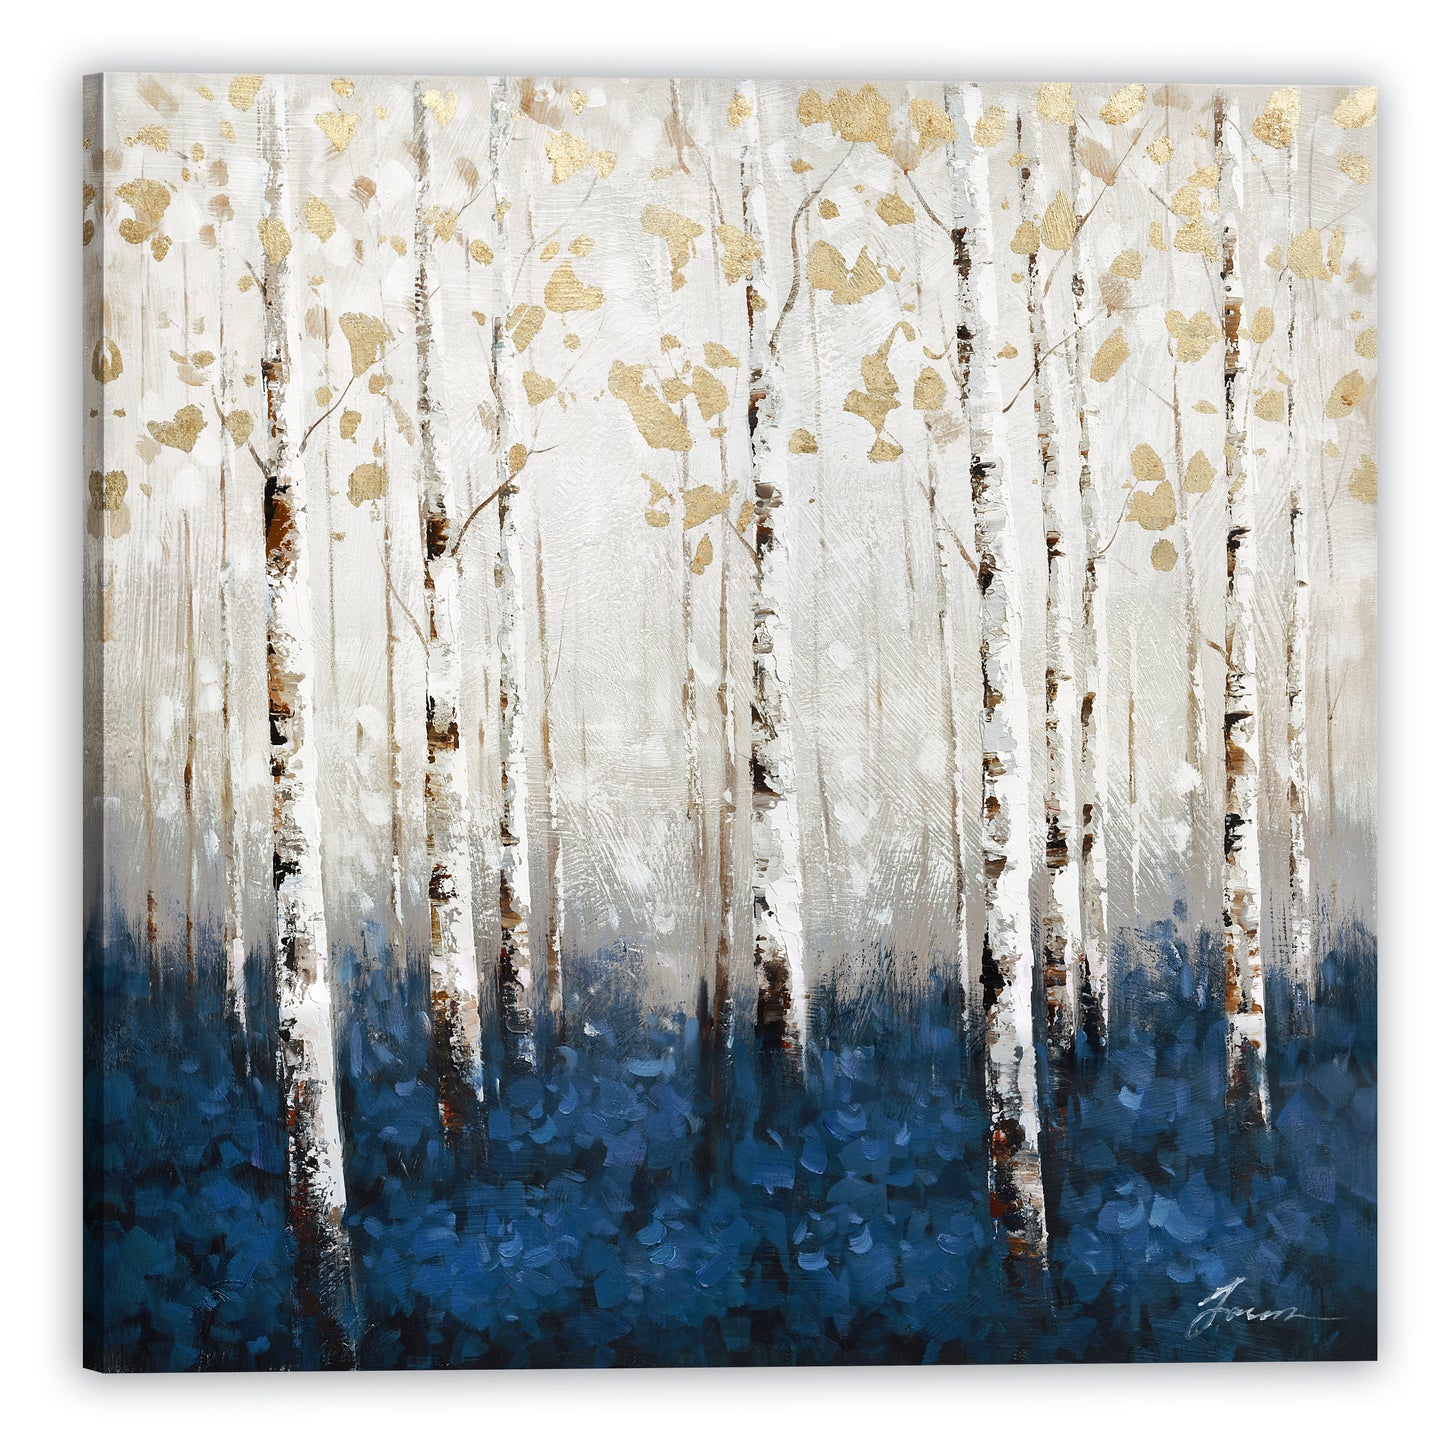 Navy blue in abstract forest - Oil Painting on Wrapped Canvas, Wall art.  wall art, canvas artwork for living room, bedroom, office